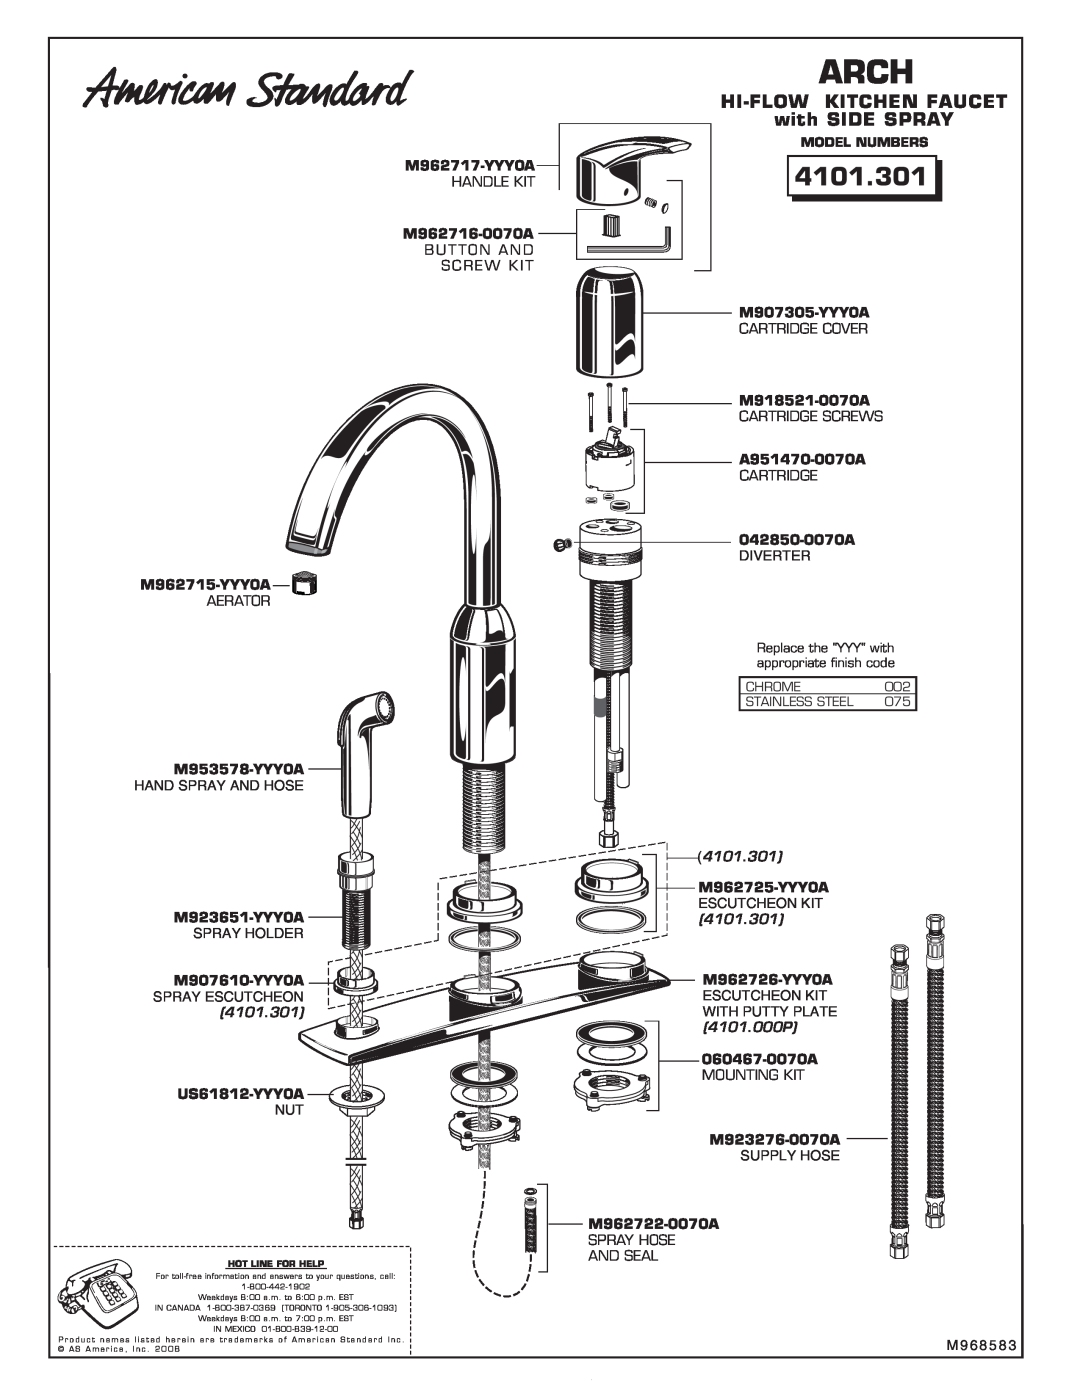 American Standard 4101.301 installation instructions Arch, HI-FLOWKITCHEN FAUCET with SIDE SPRAY 